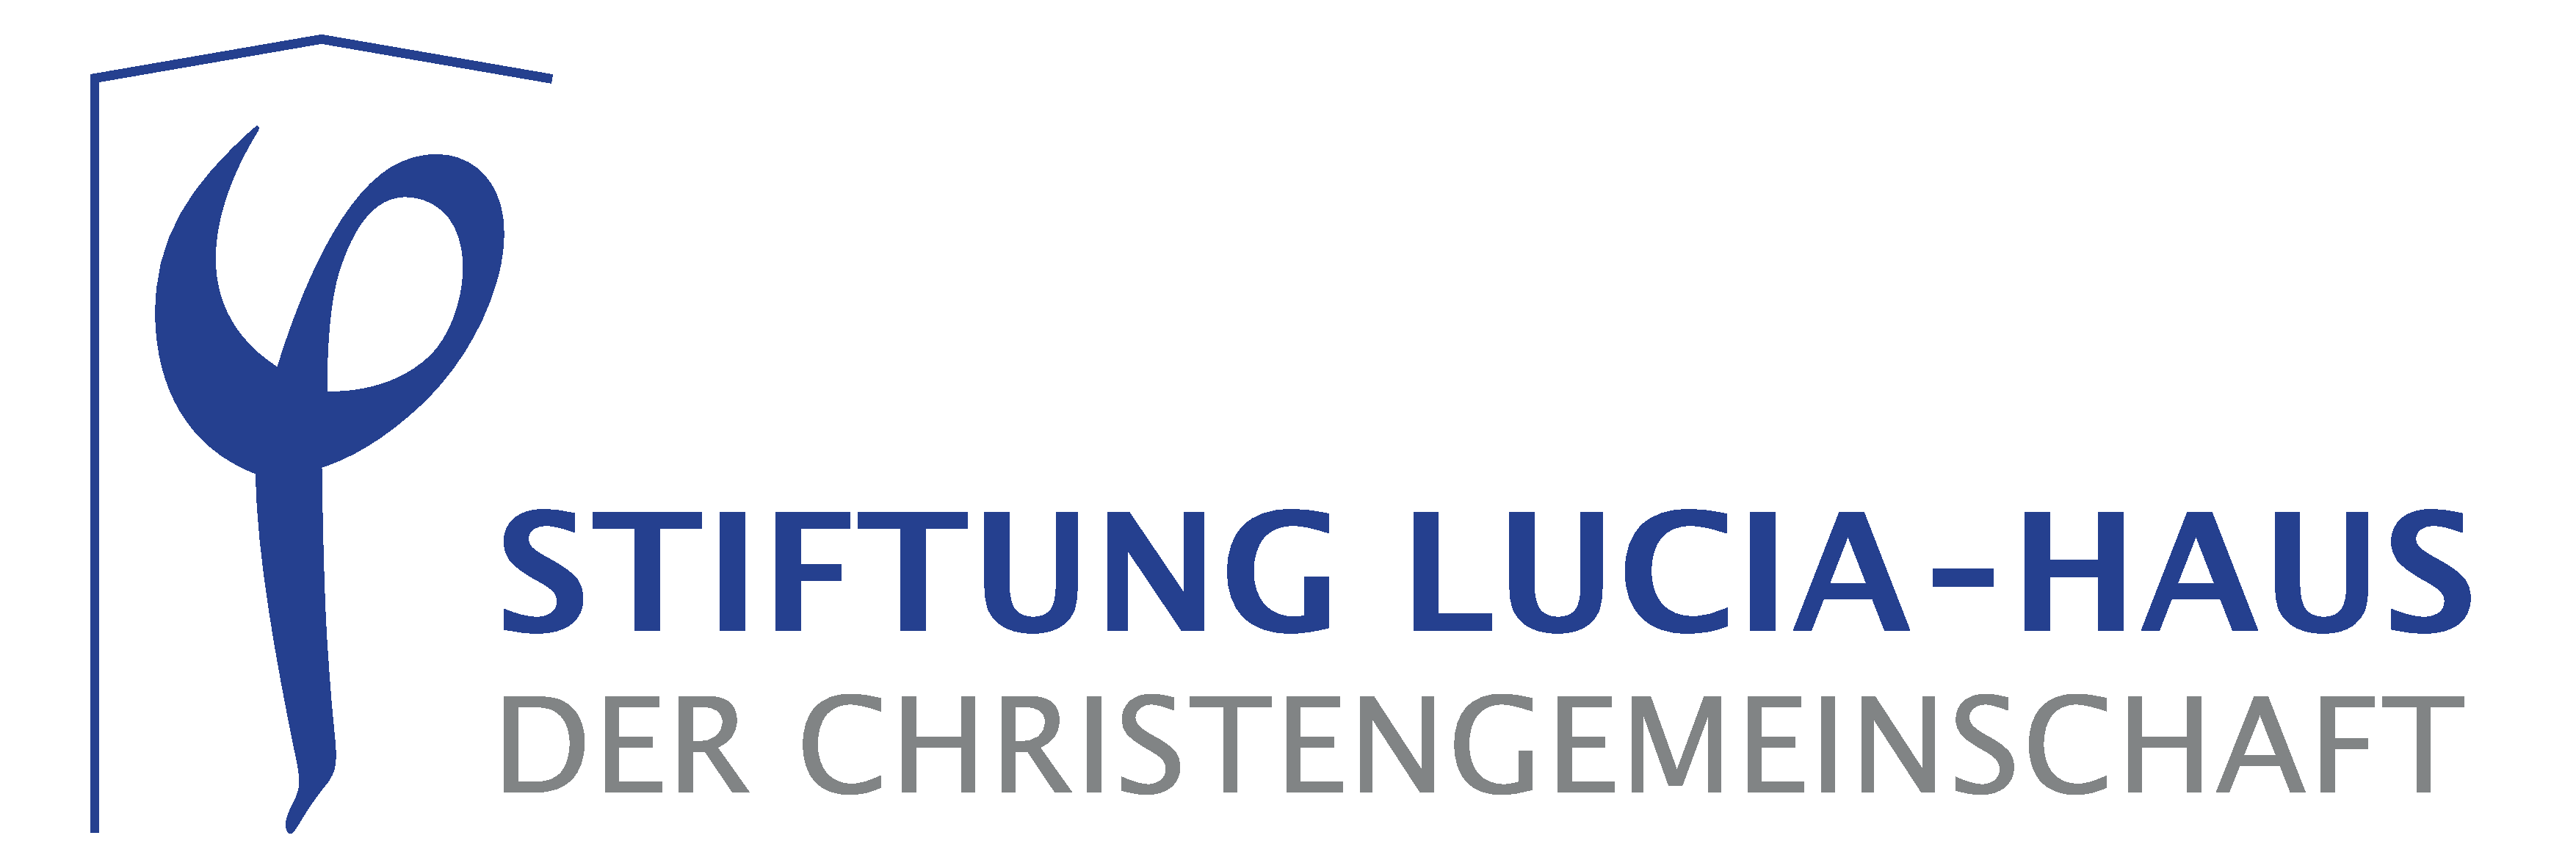 STIFTUNG LUCIA-HAUS